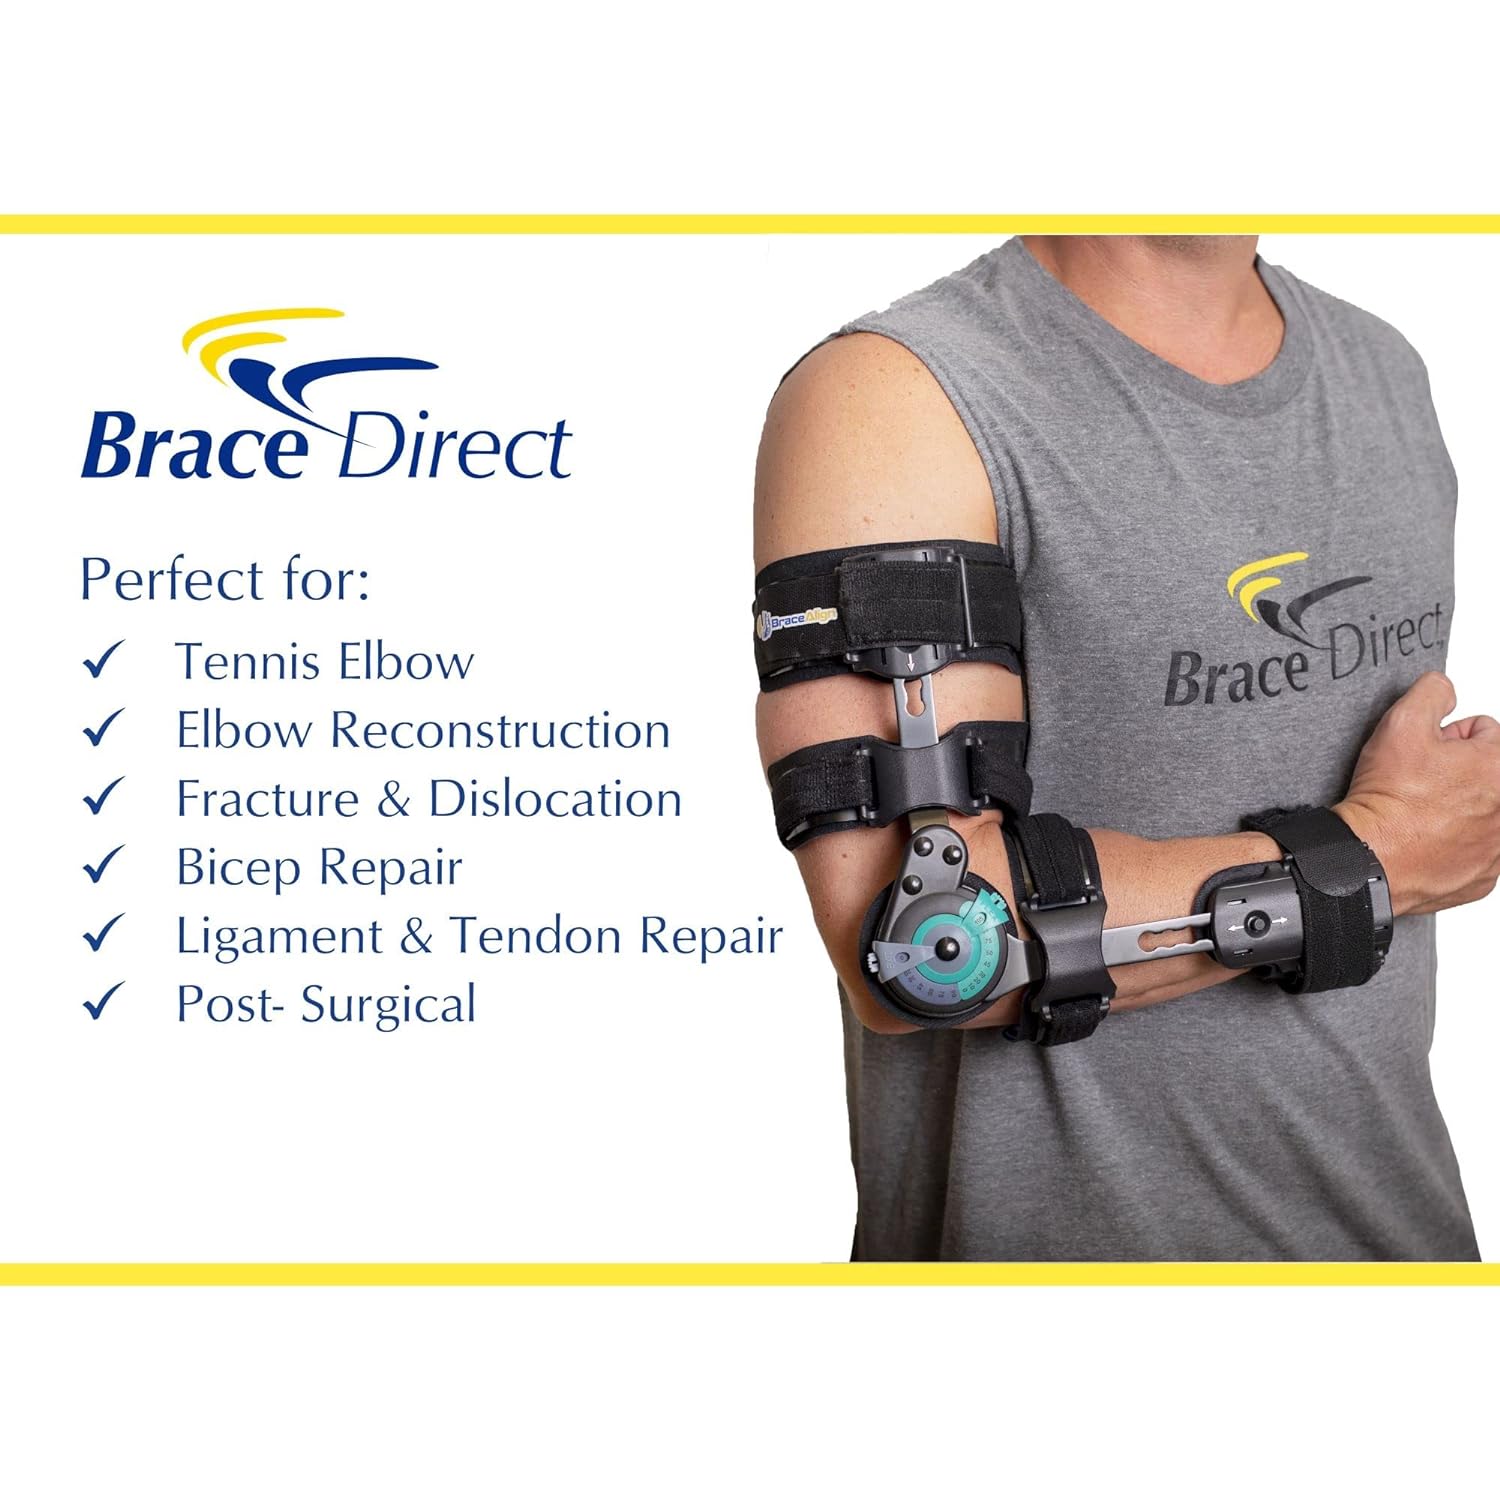 Brace Align Medical Prescription Elbow Brace PDAC Approved L3760, L3761 Hinged Range of Motion, Shoulder Sling Stabilizer for Post-Op, Surgery Recovery, Ligament and Tendon Repairs and Dislocation